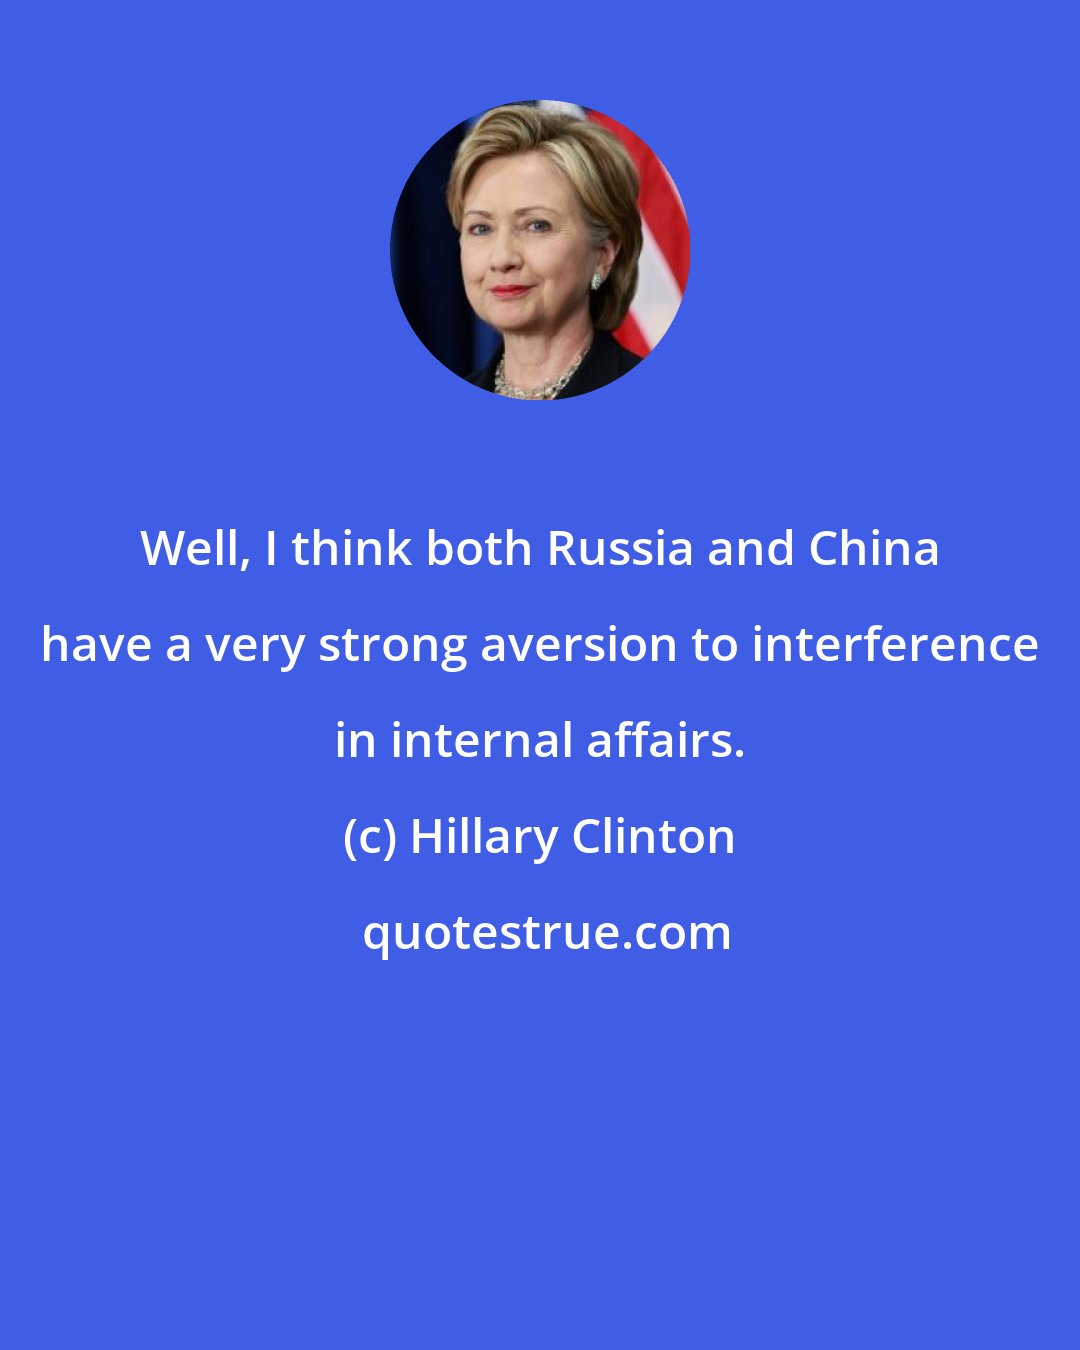 Hillary Clinton: Well, I think both Russia and China have a very strong aversion to interference in internal affairs.